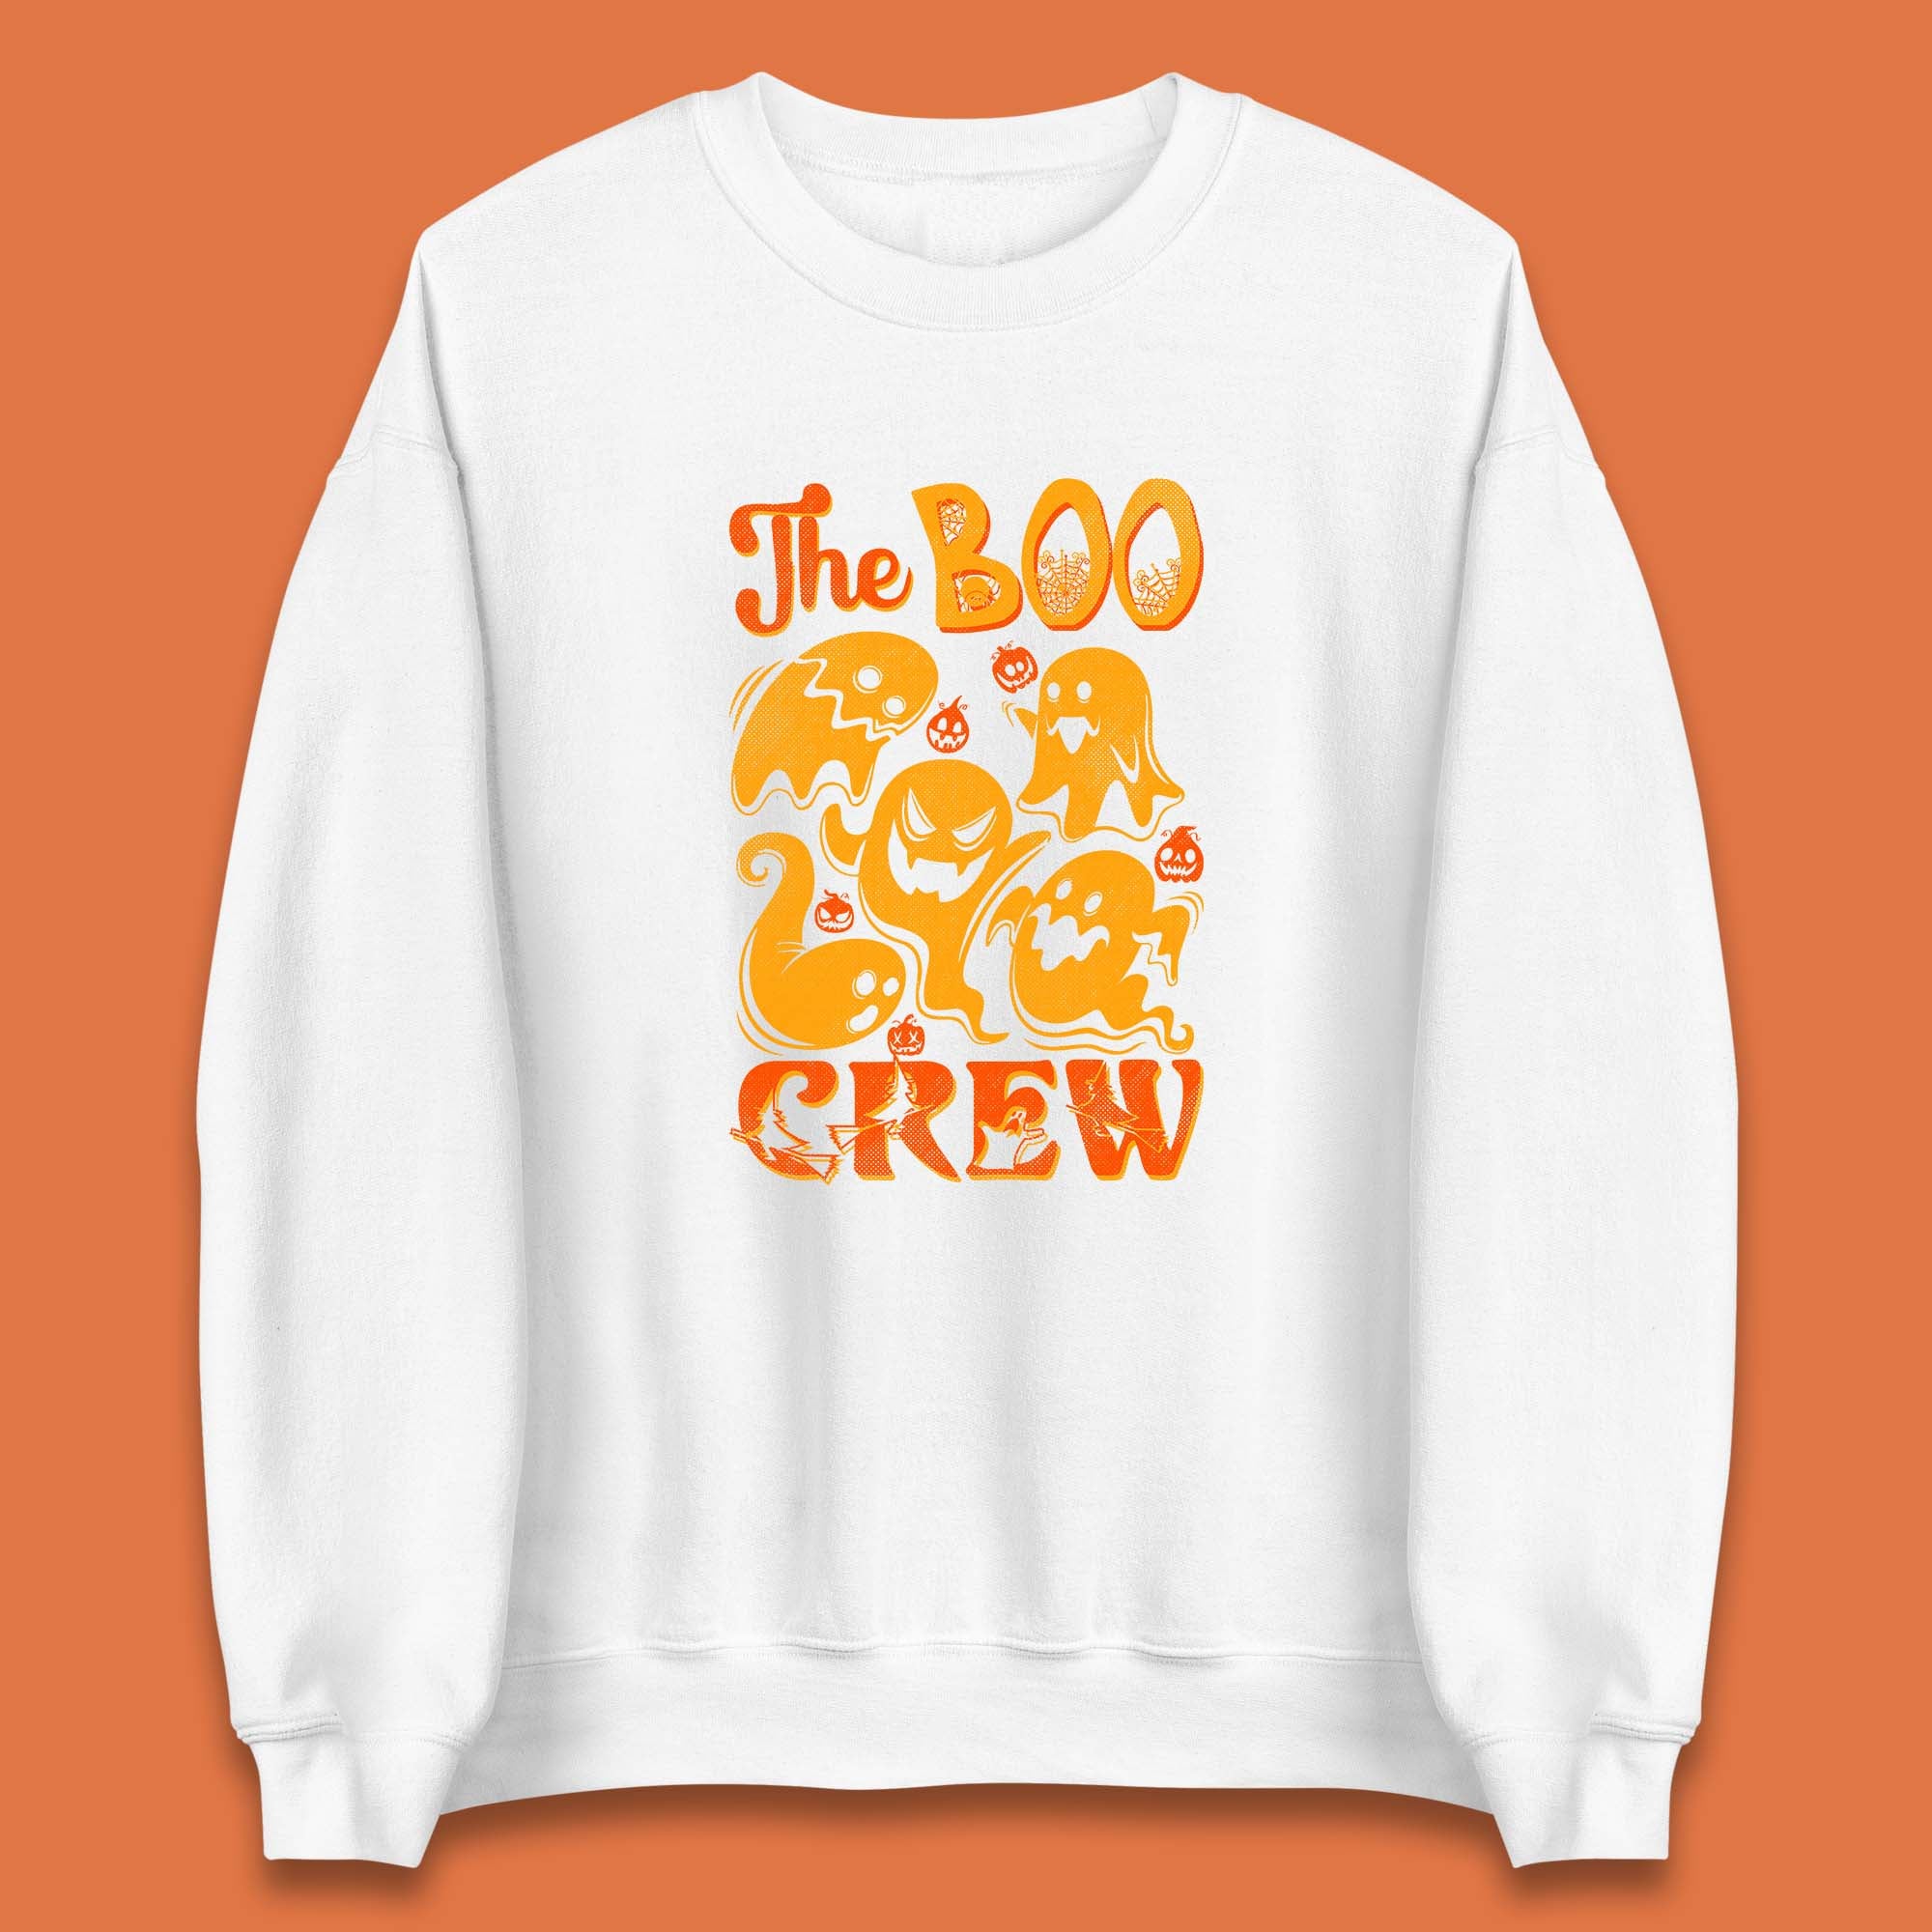 The Boo Crew Halloween Horror Scary Boo Ghost Squad Spooky Vibes Unisex Sweatshirt